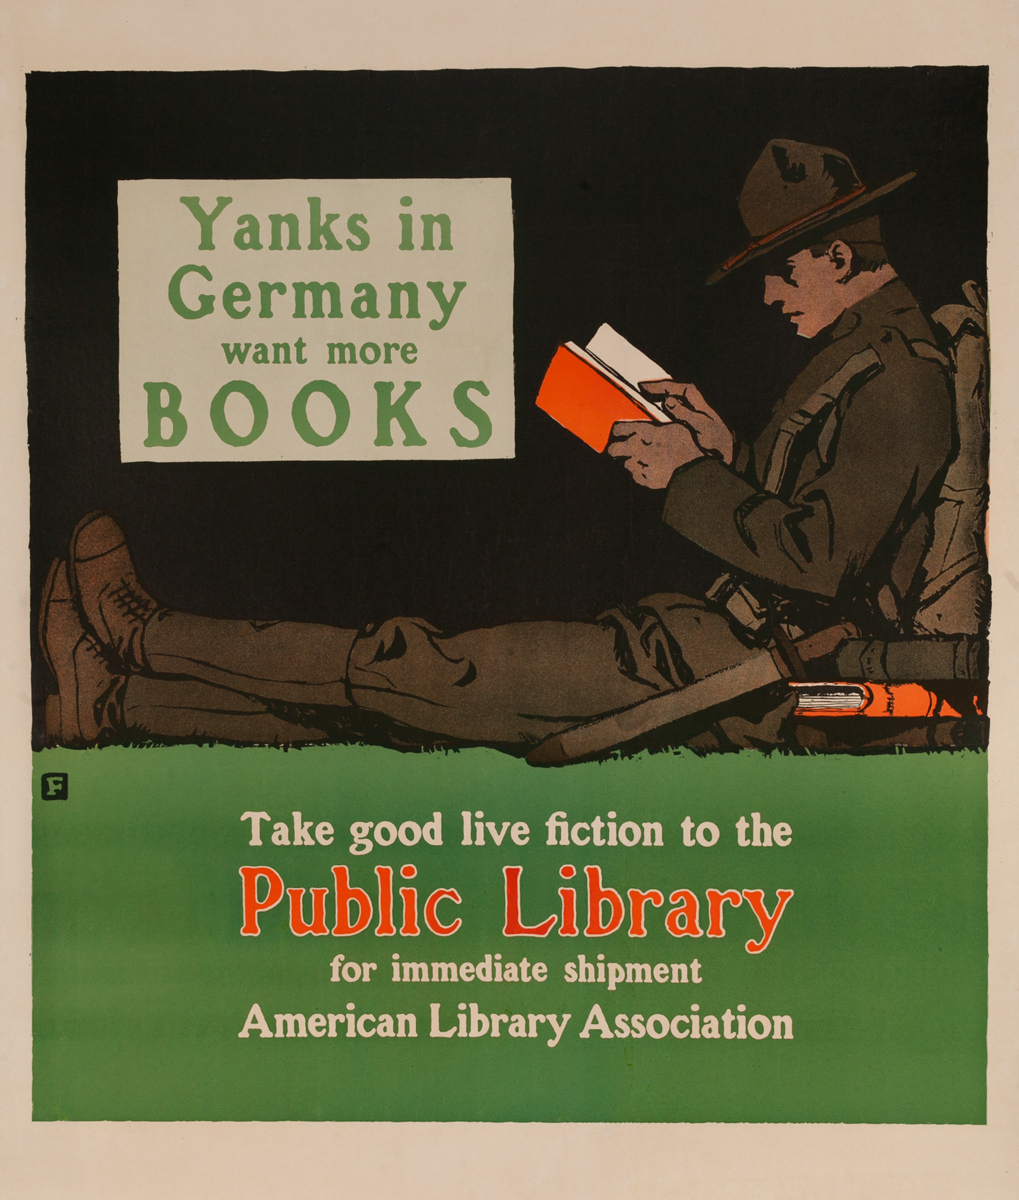 Yanks in Germany want more BOOKS, Original American WWI American Library Association Poster